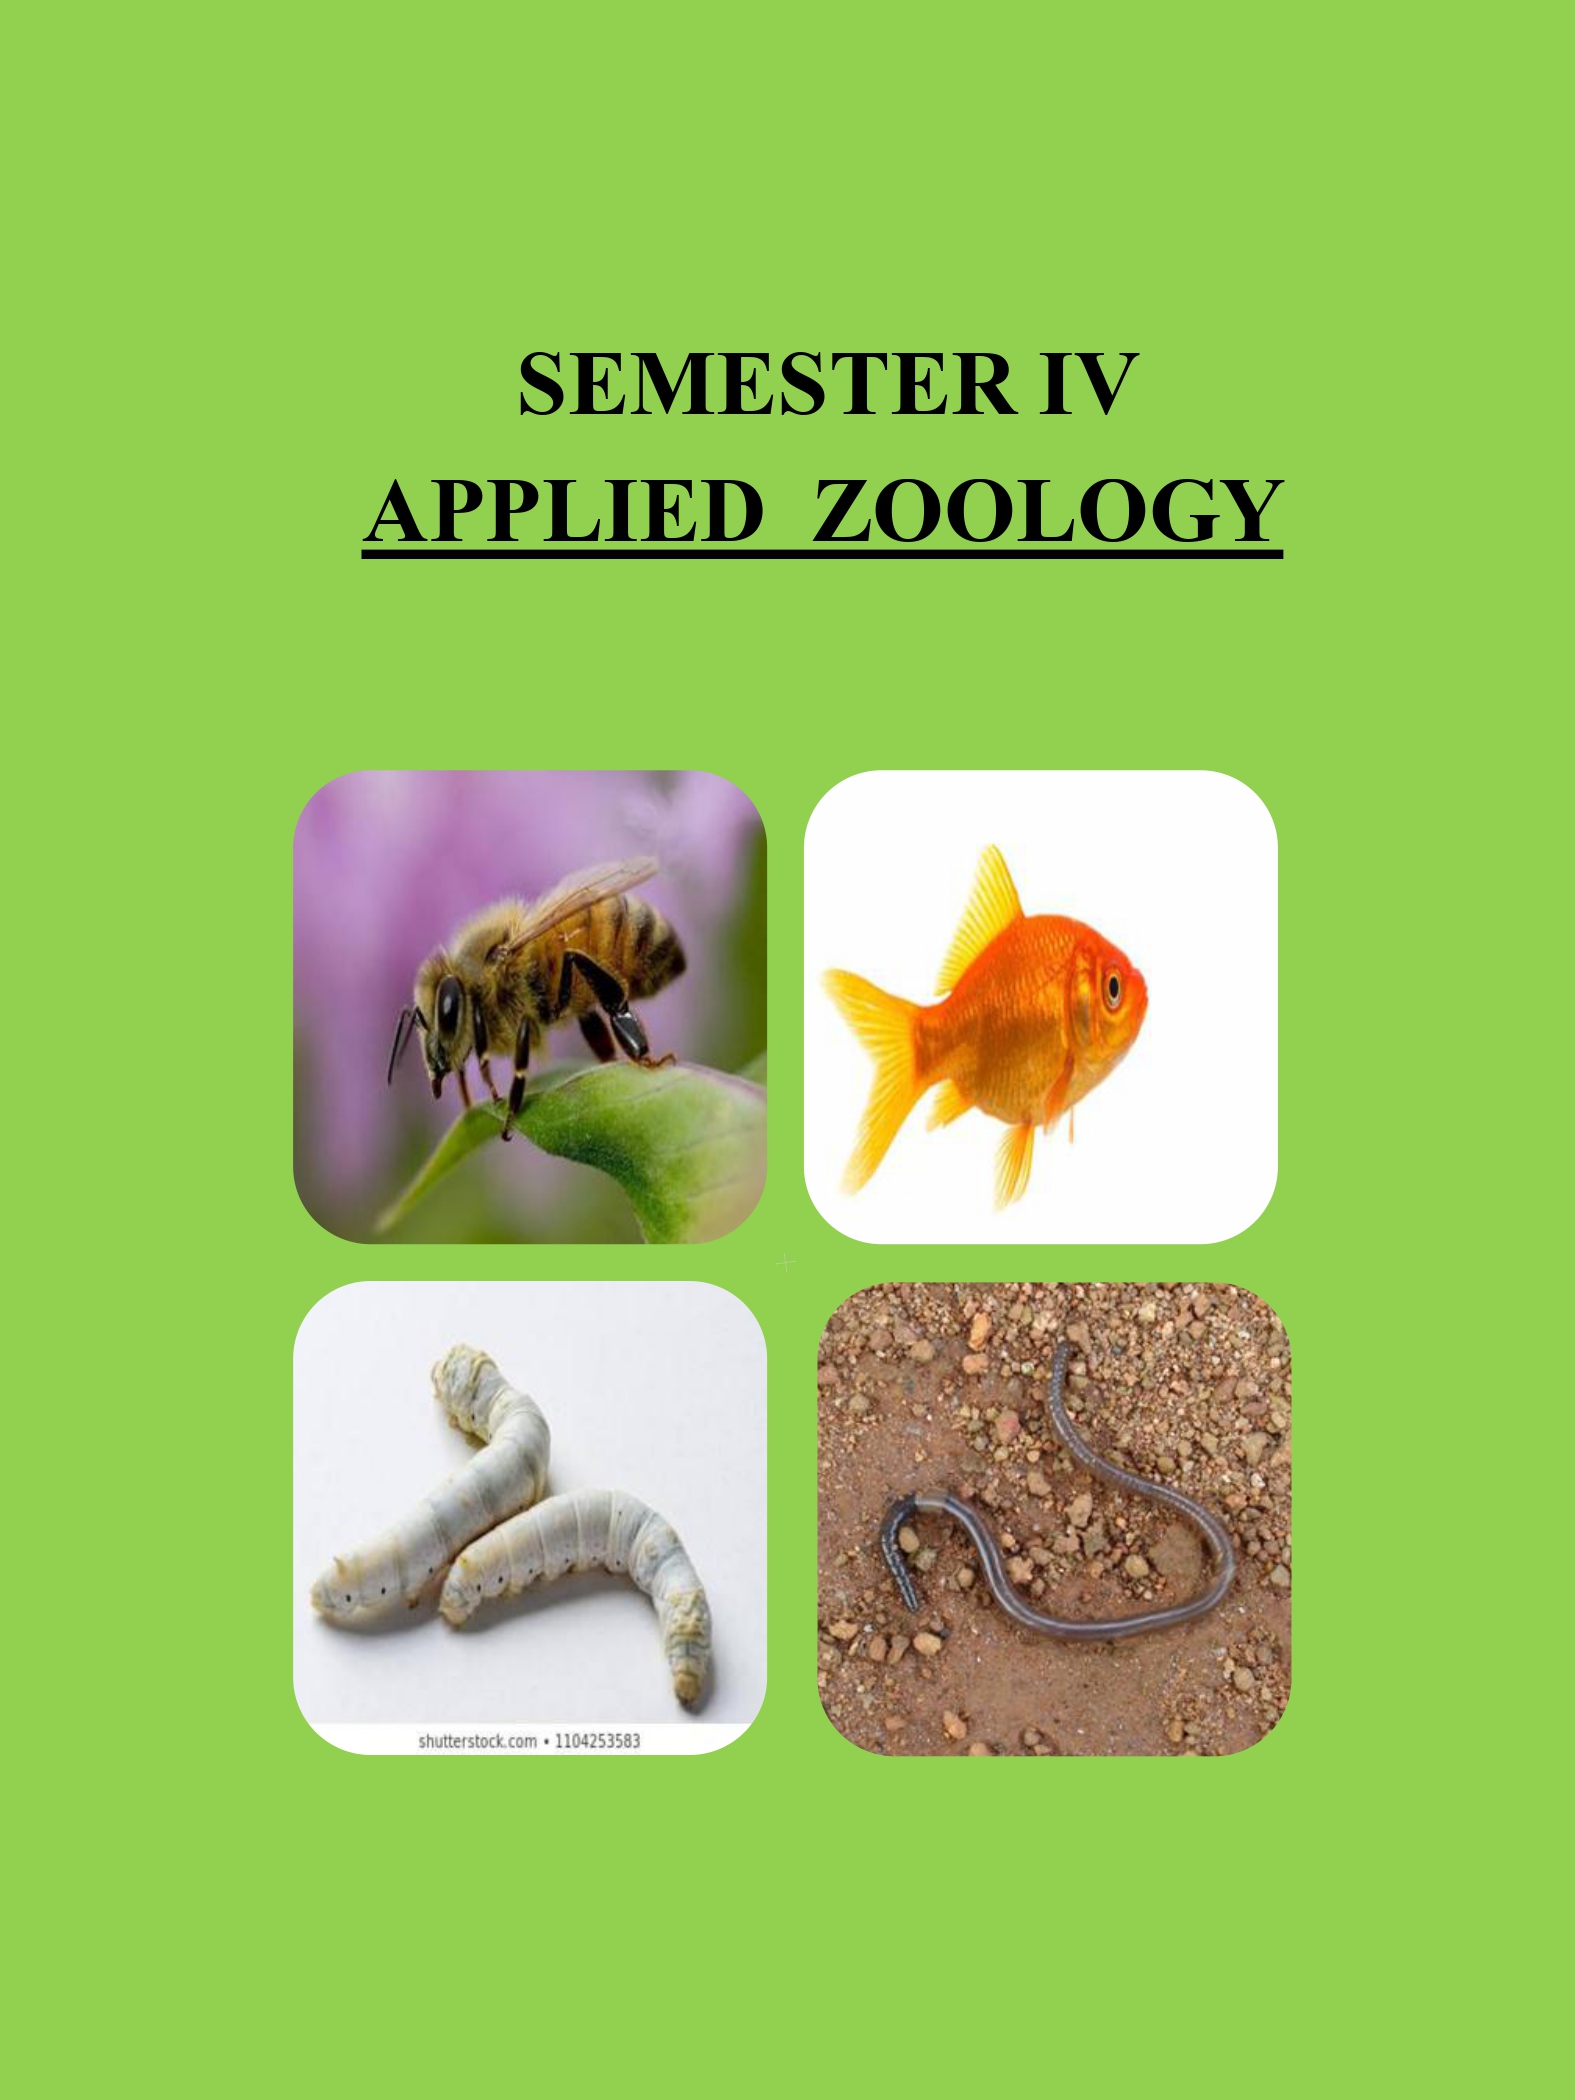 APPLIED ZOOLOGY